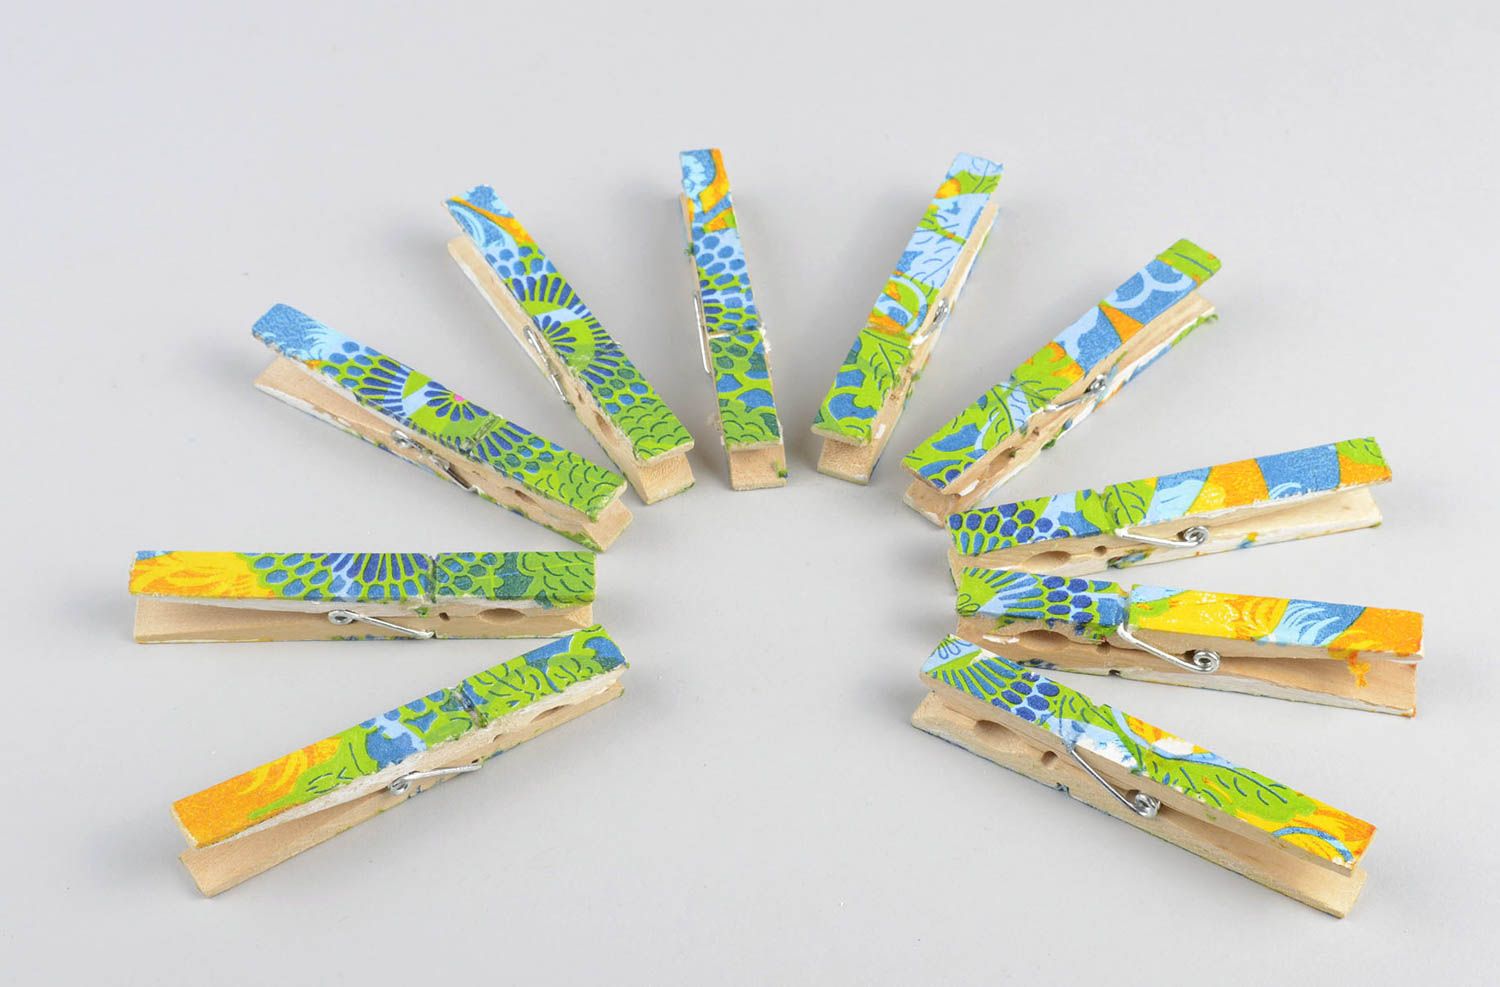 Handmade pegs unusual gift wooden pegs decorative clothespins set of 10 items photo 2